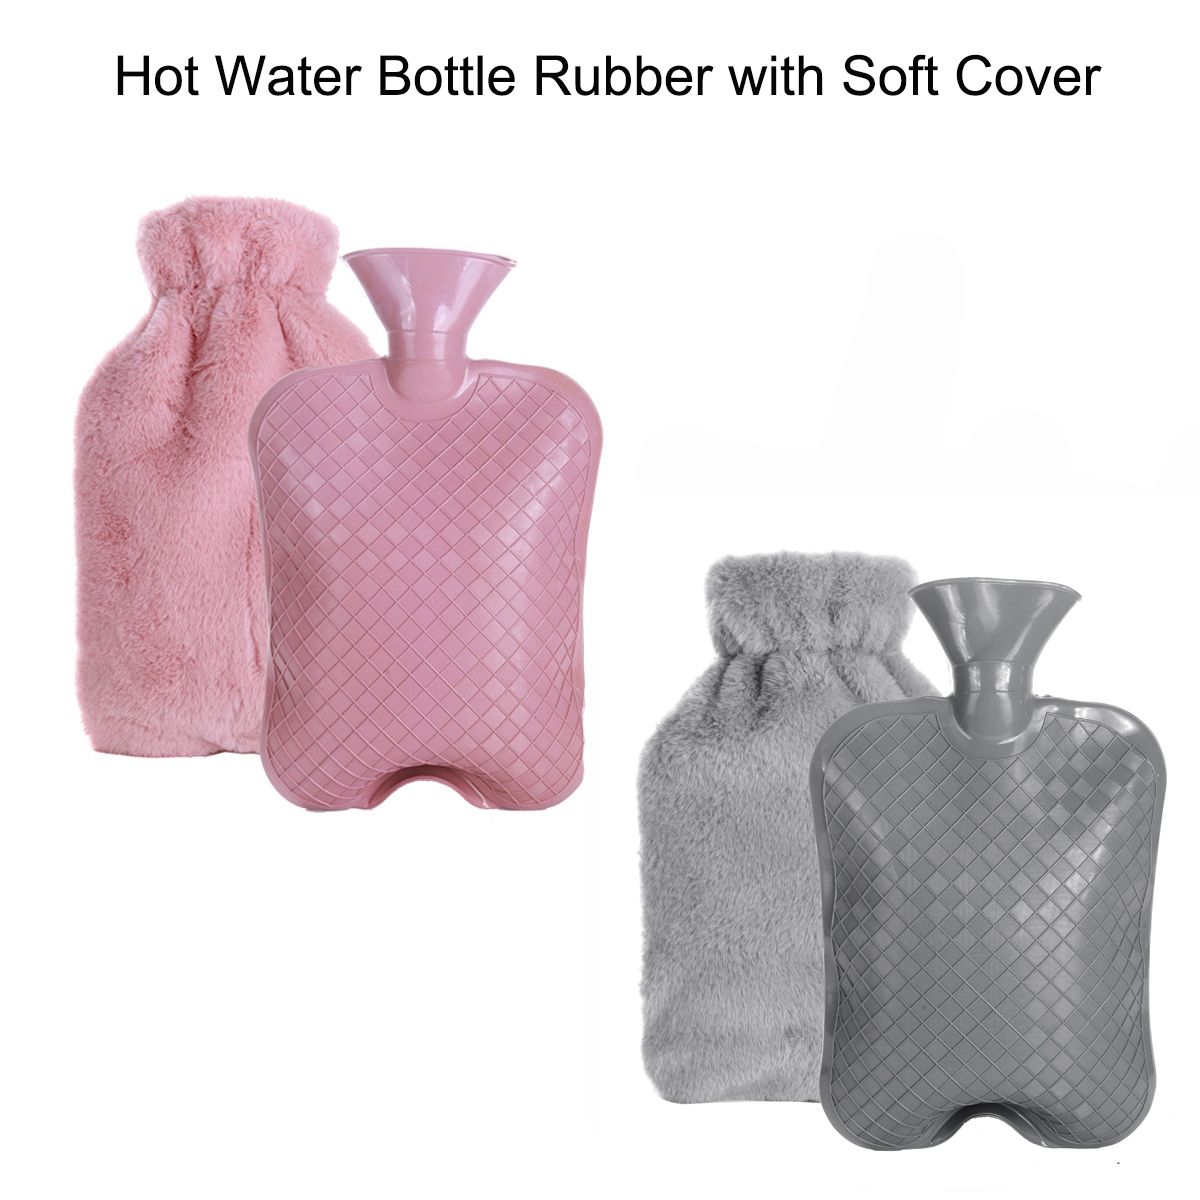 2L Hot Water Bottle Hot Water Bag With Soft Plush Cover Removable Hot Cold Pack For Menstrual Cramps And Pain Relief